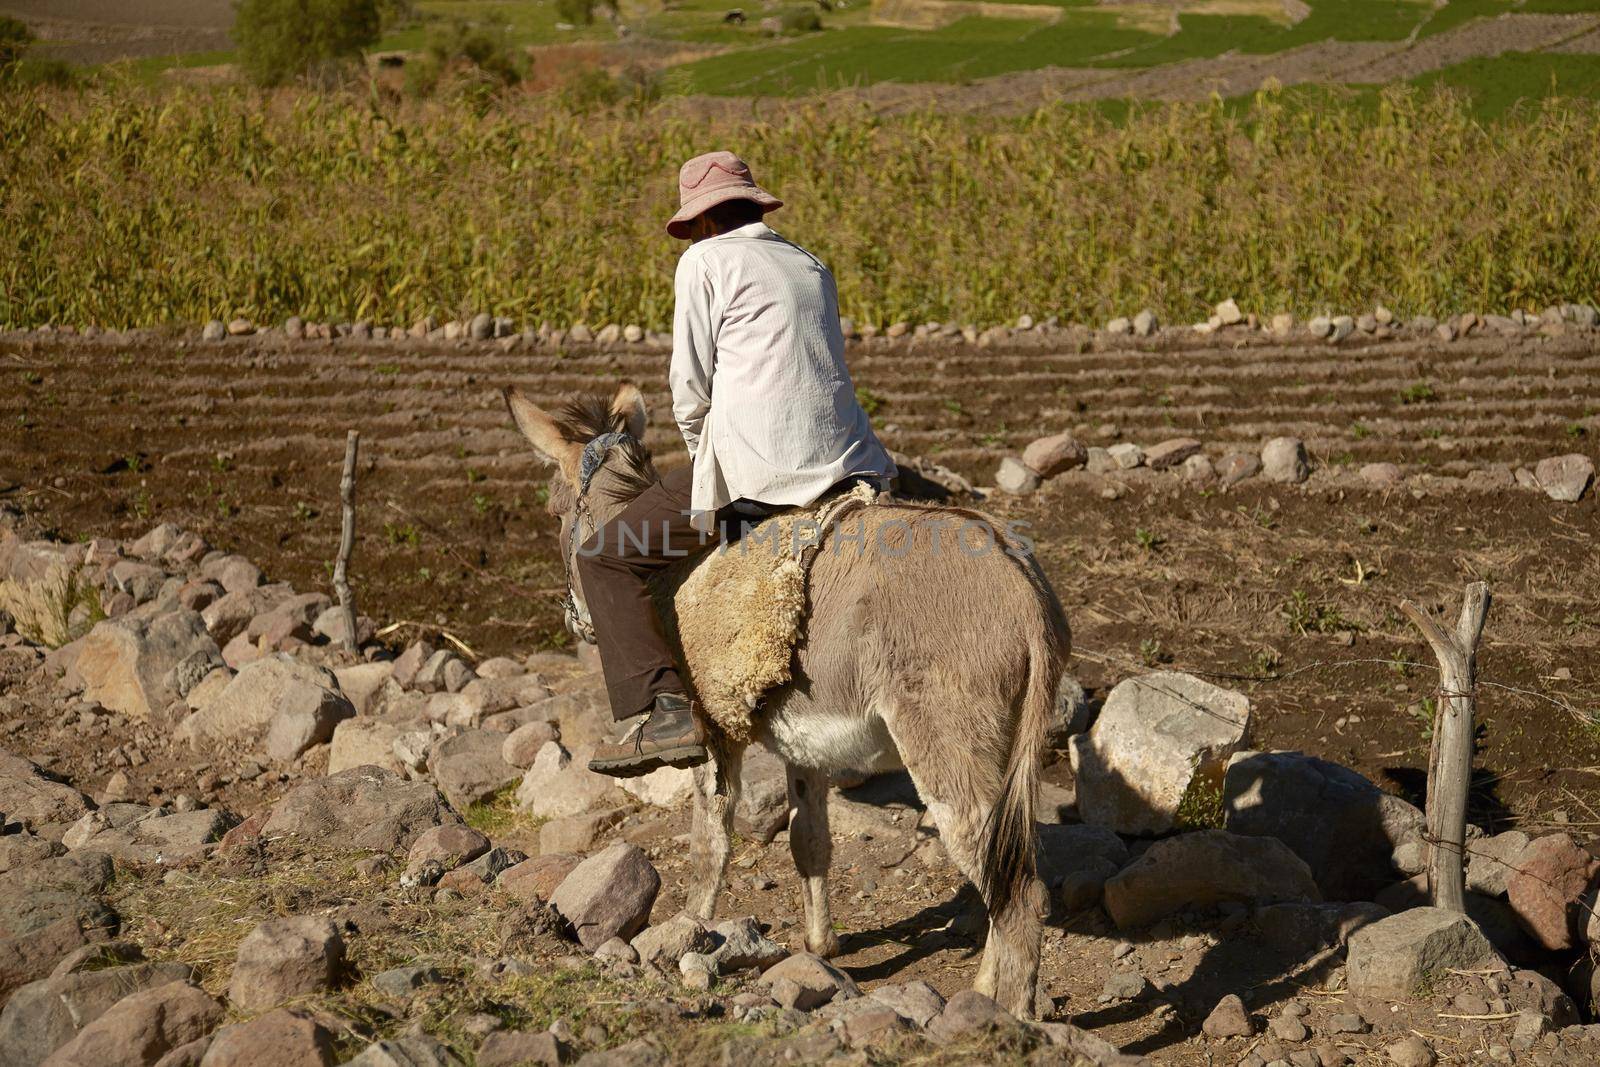 AREQUIPA, PERU - JUNE 17, 2012: Local man riding a donkey while working on a field in Arequipa Peru